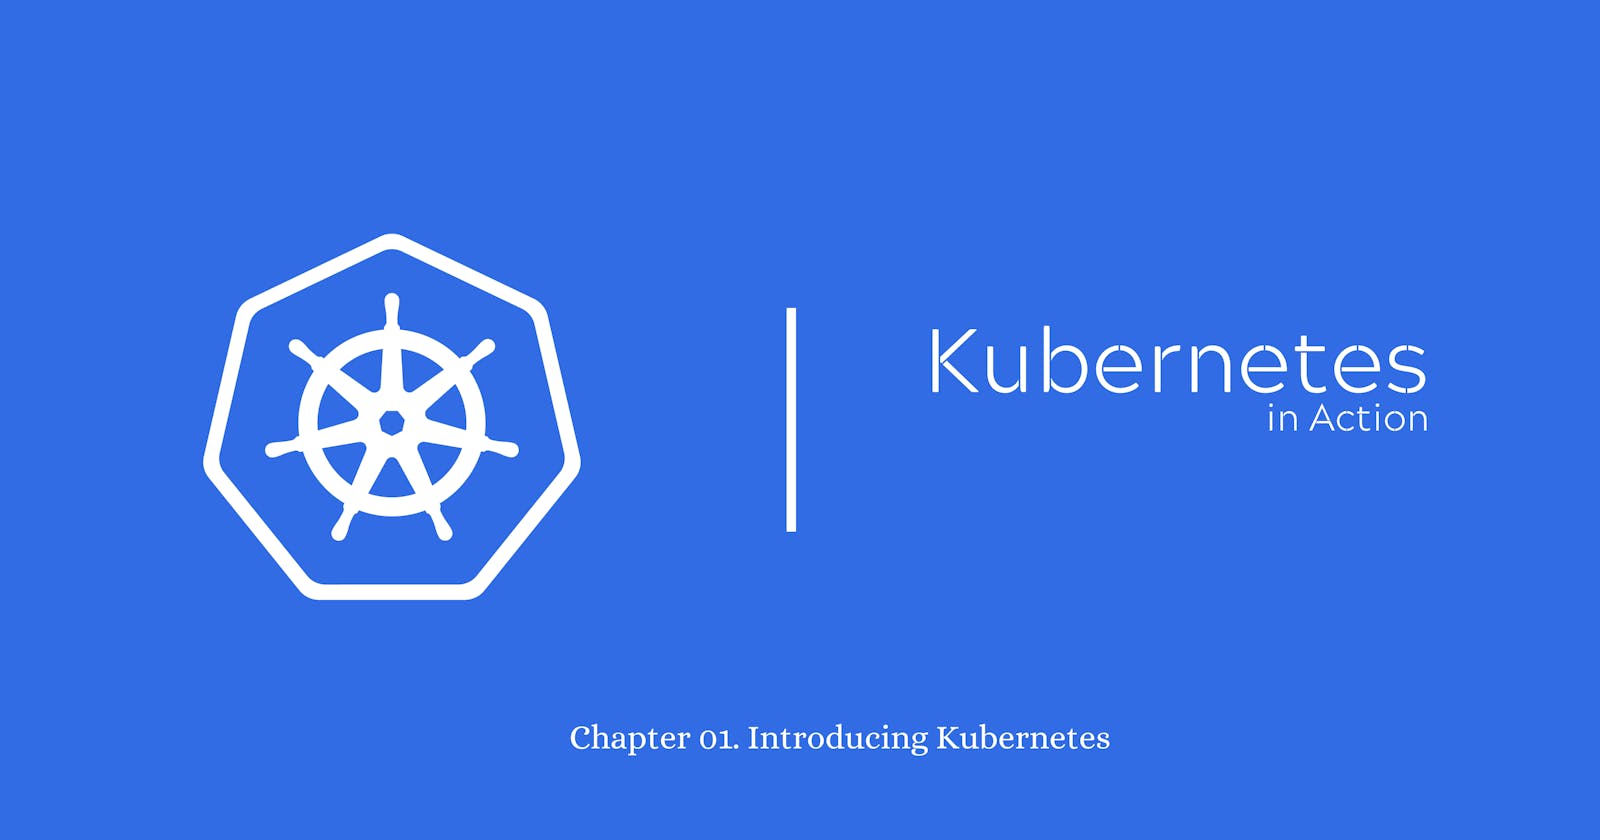 Chapter 01. Introducing Kubernetes - Kubernetes in Action